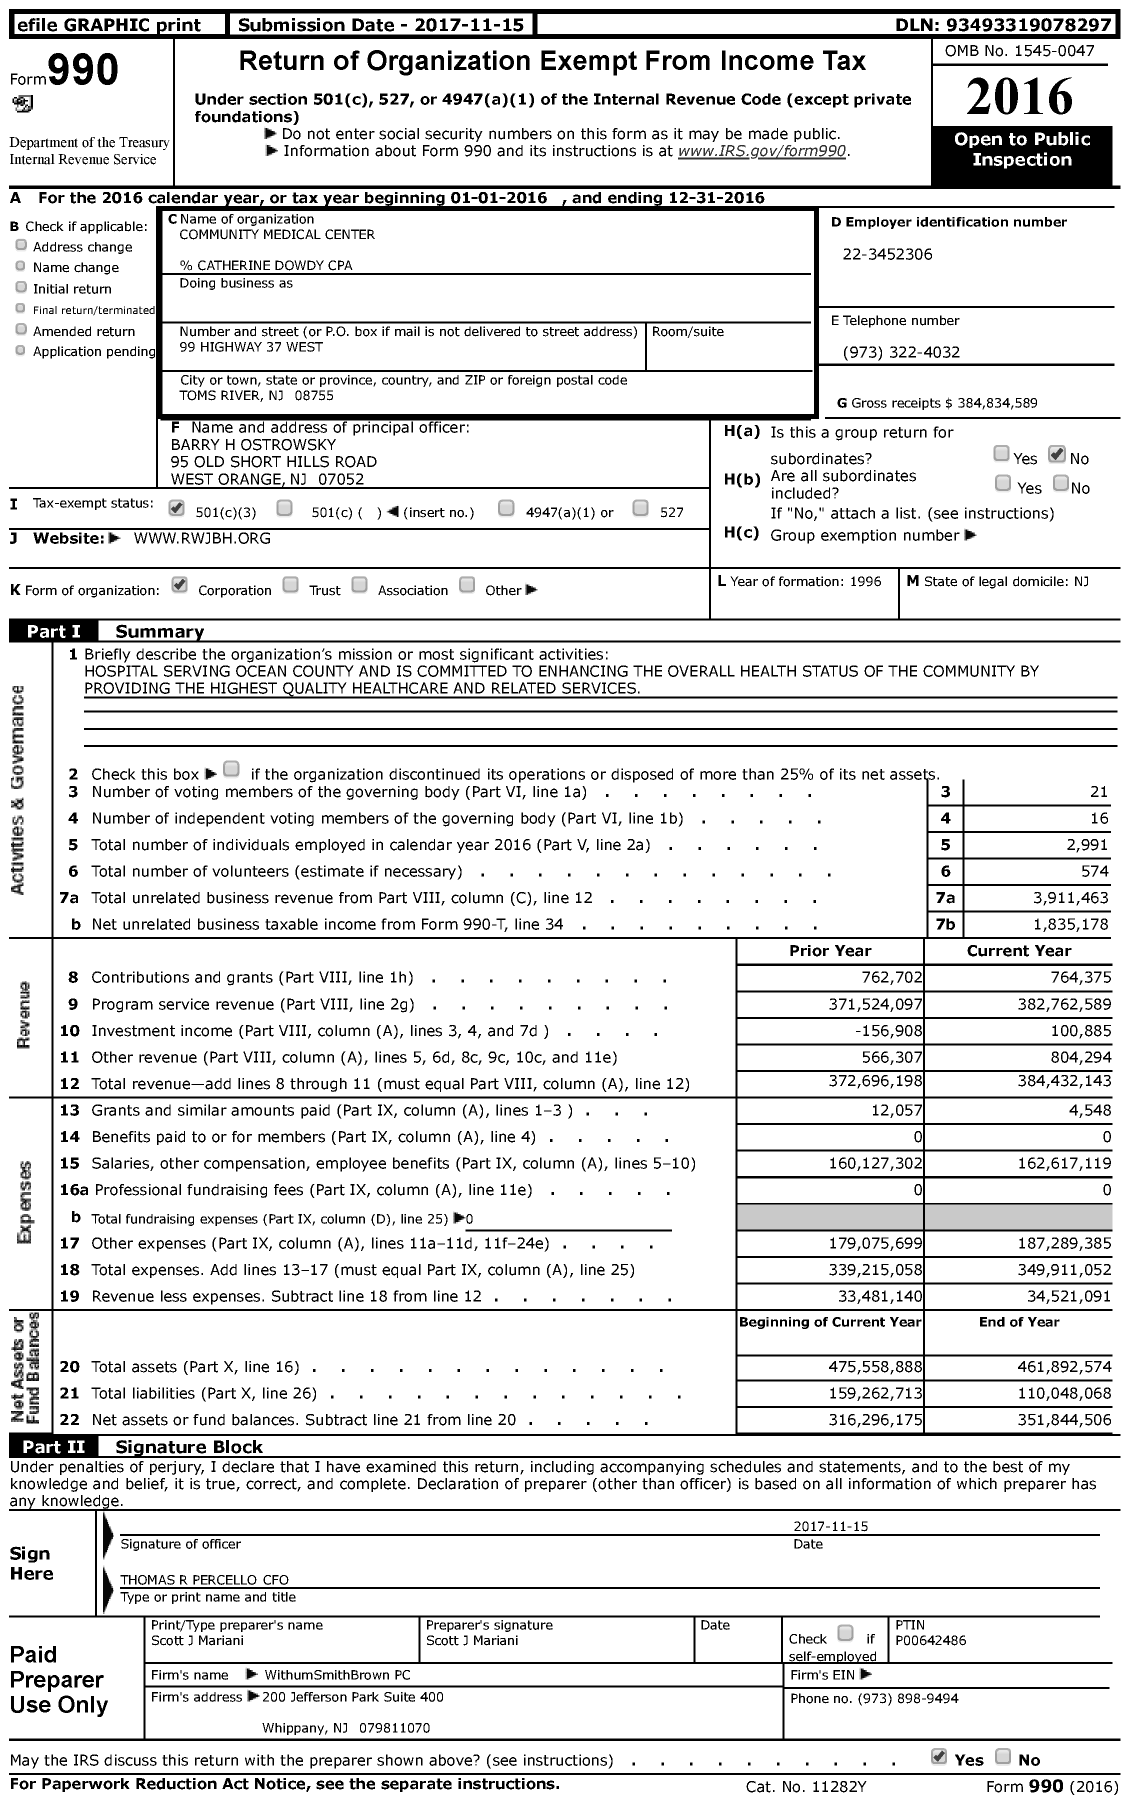 Image of first page of 2016 Form 990 for Community Medical Center (CMC)